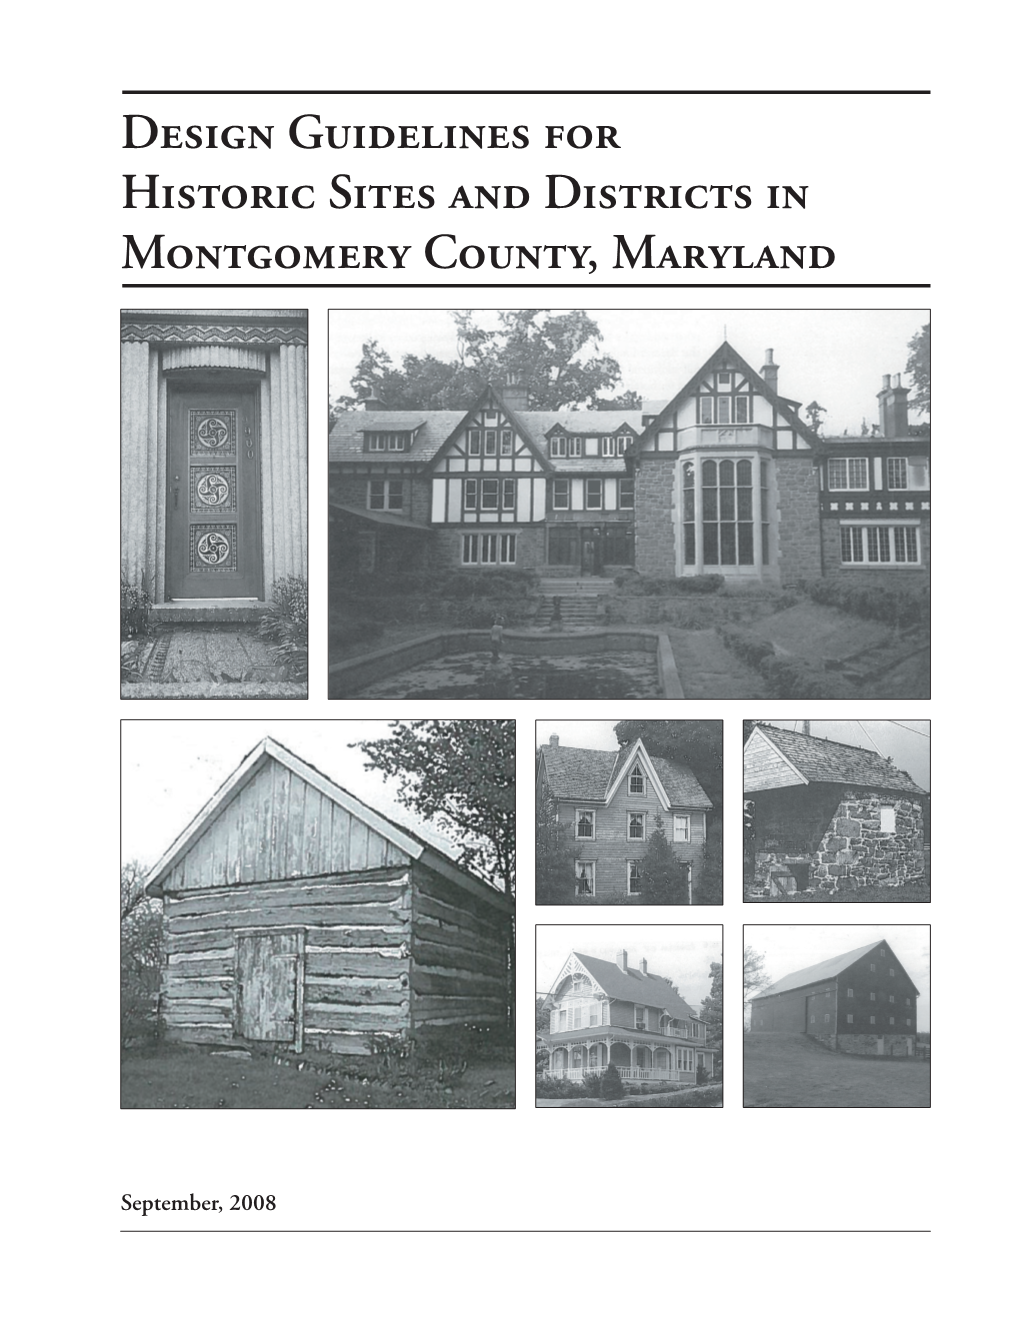 Design Guidelines for Historic Sites and Districts in Montgomery County, Maryland